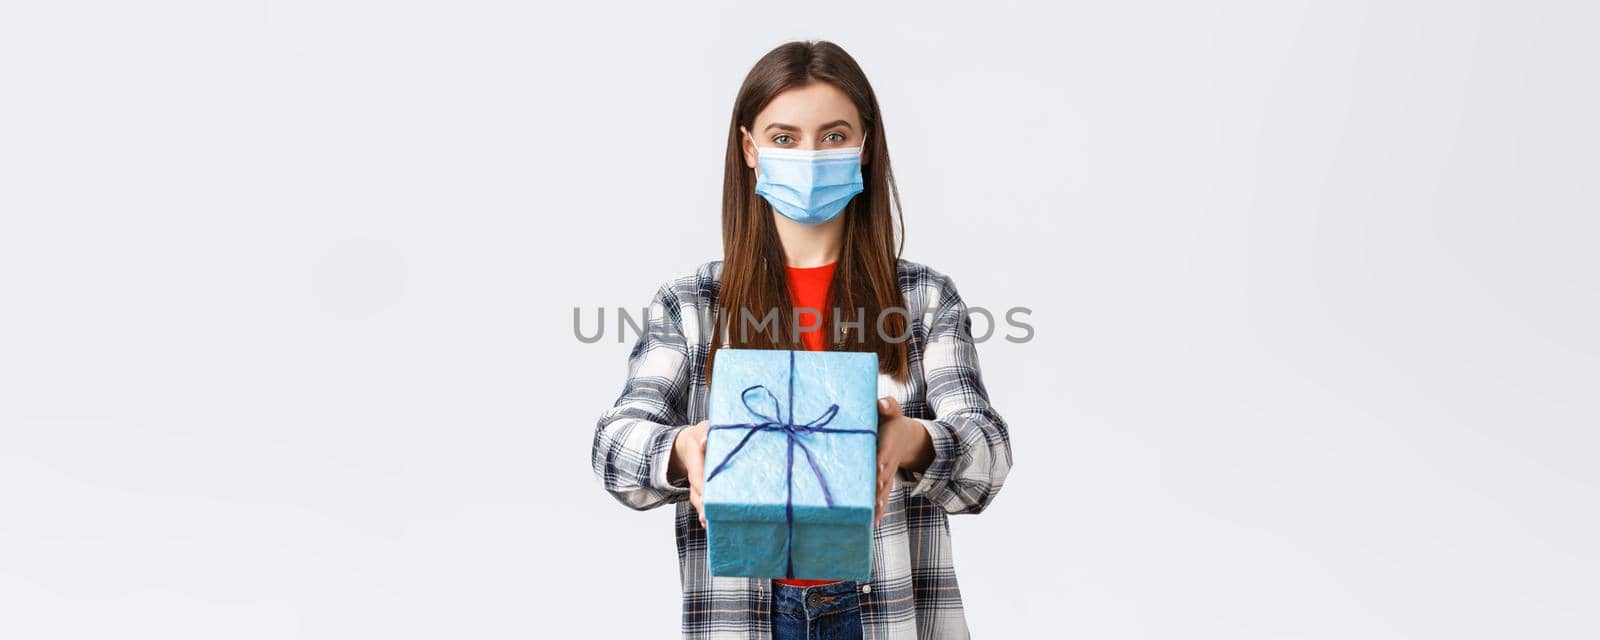 Covid-19, lifestyle, holidays and celebration concept. Cheerful young girl in medical mask stretch hand, handing birthday gift to you, smiling, congratulate with b-day, white background.